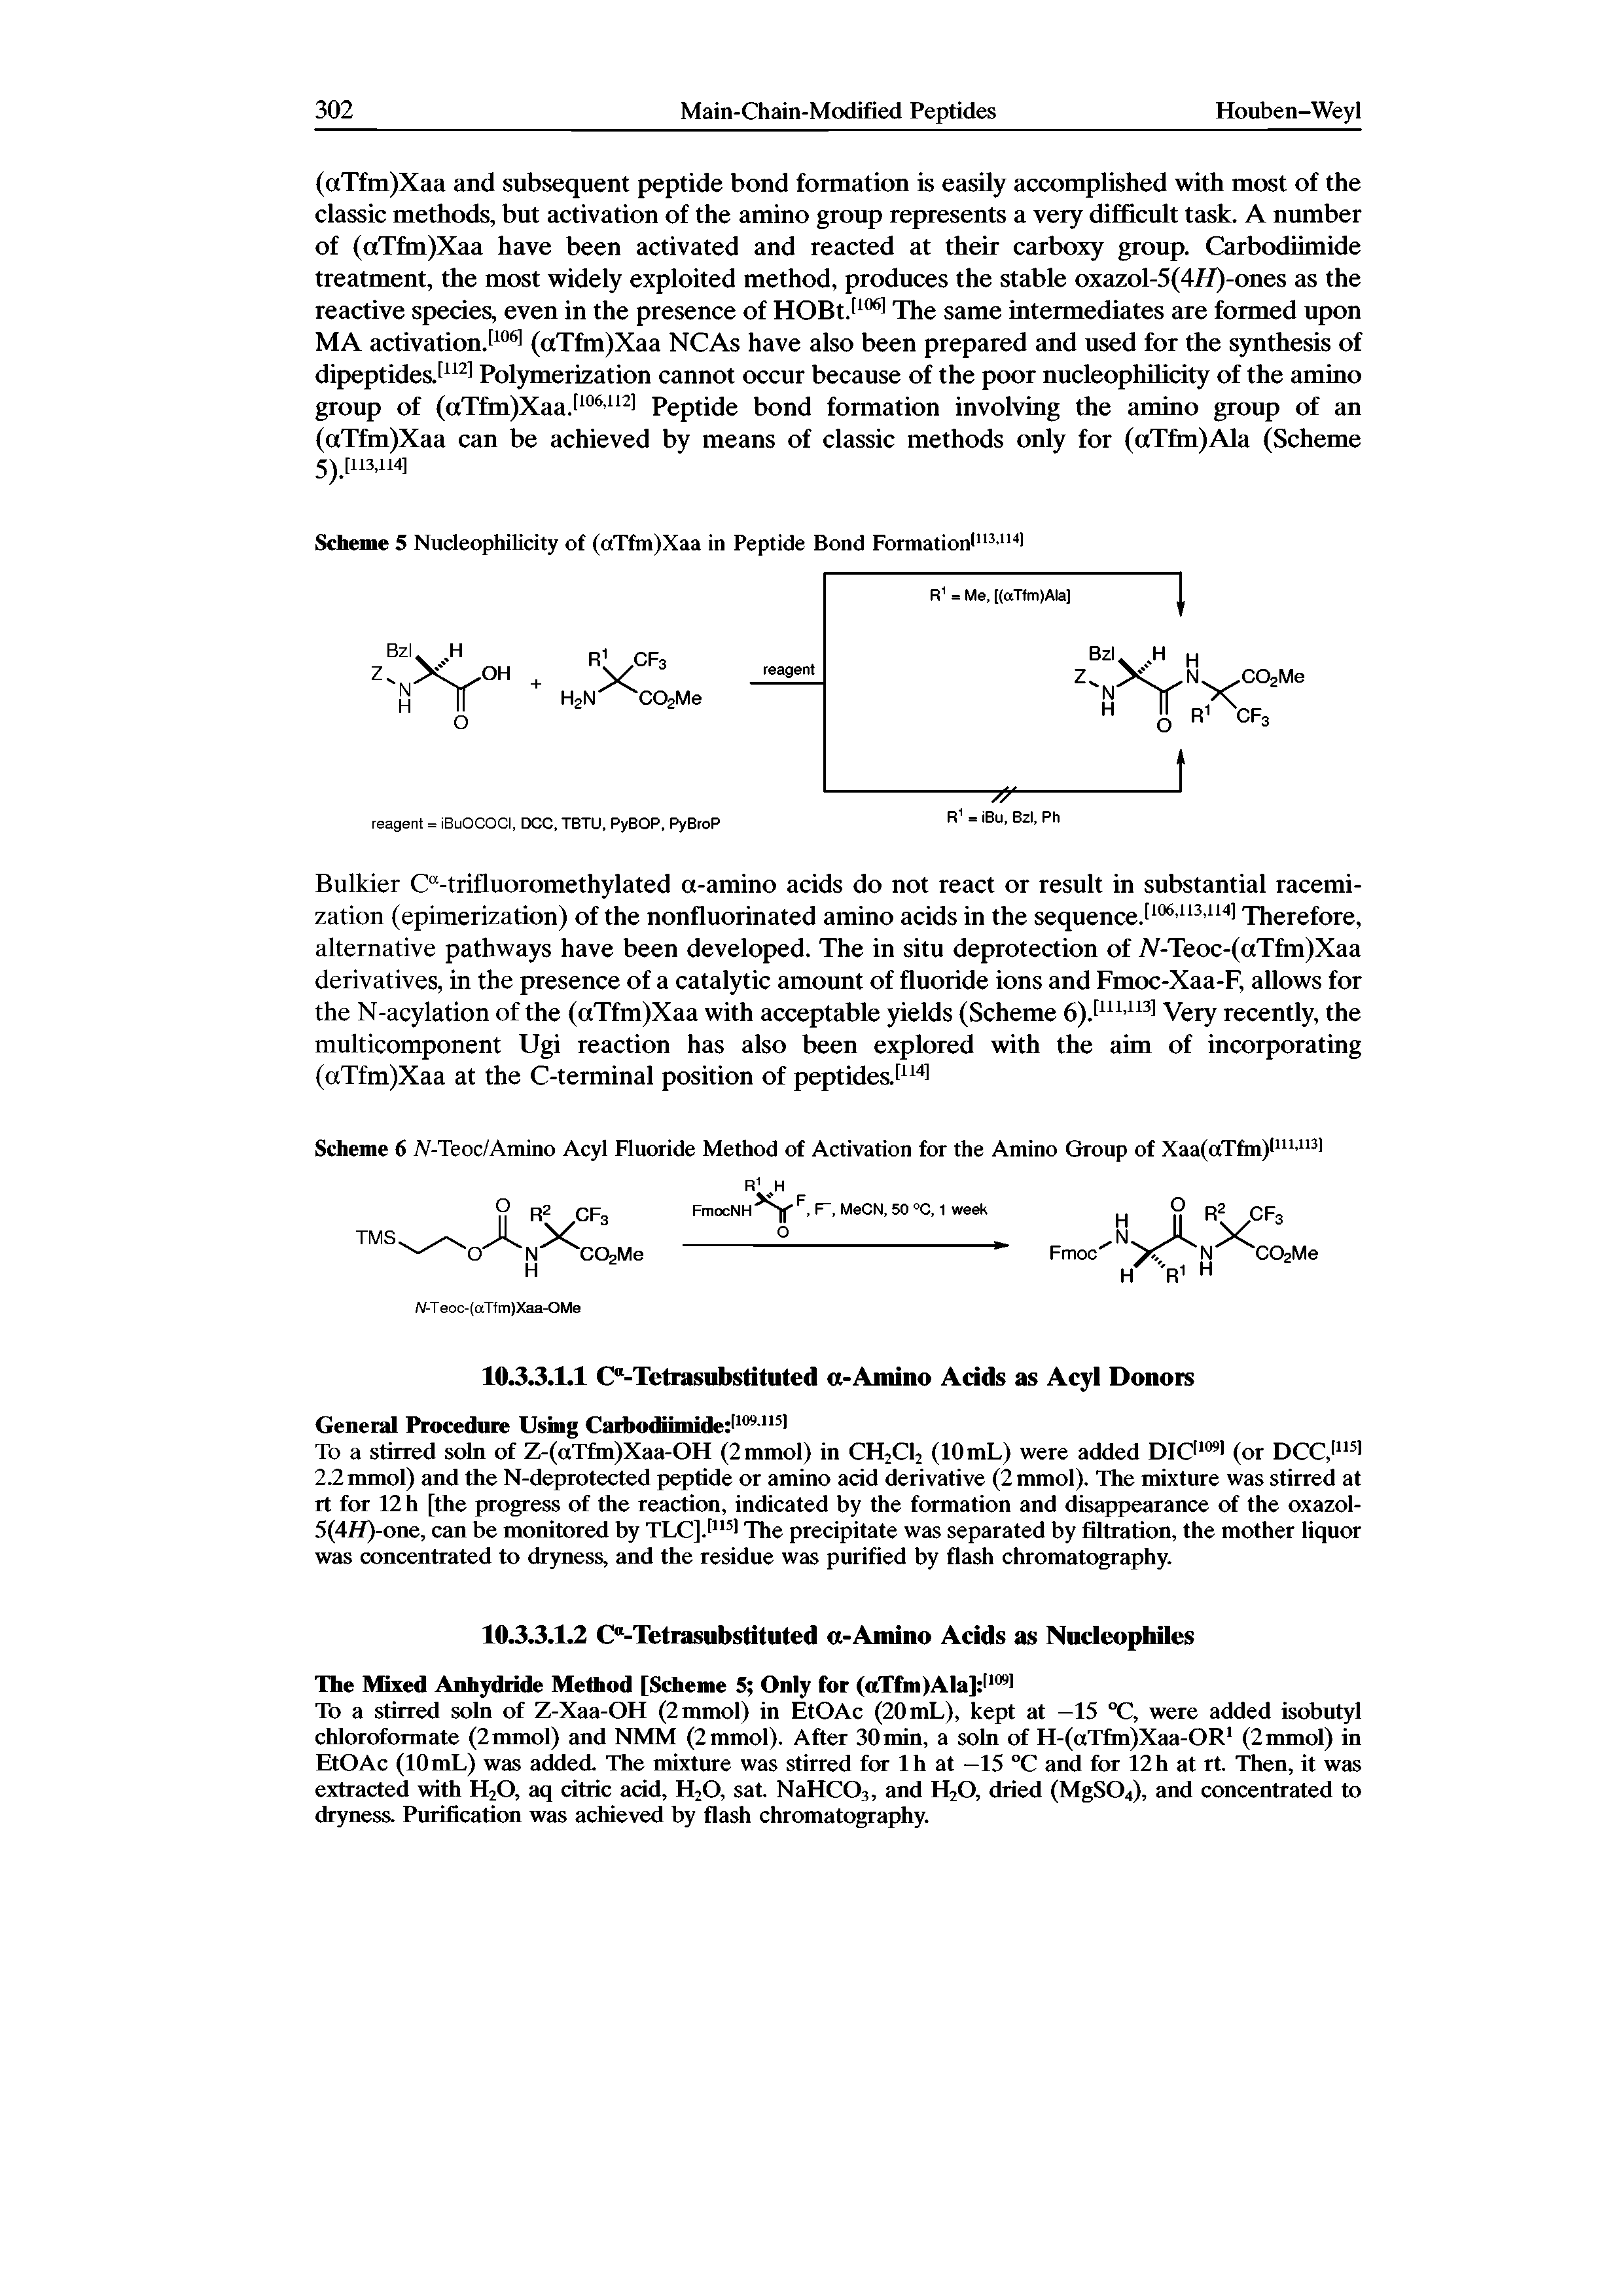 Scheme 6 A-Teoc/Amino Acyl Fluoride Method of Activation for the Amino Group of Xaa(aTfm) 111113 ...